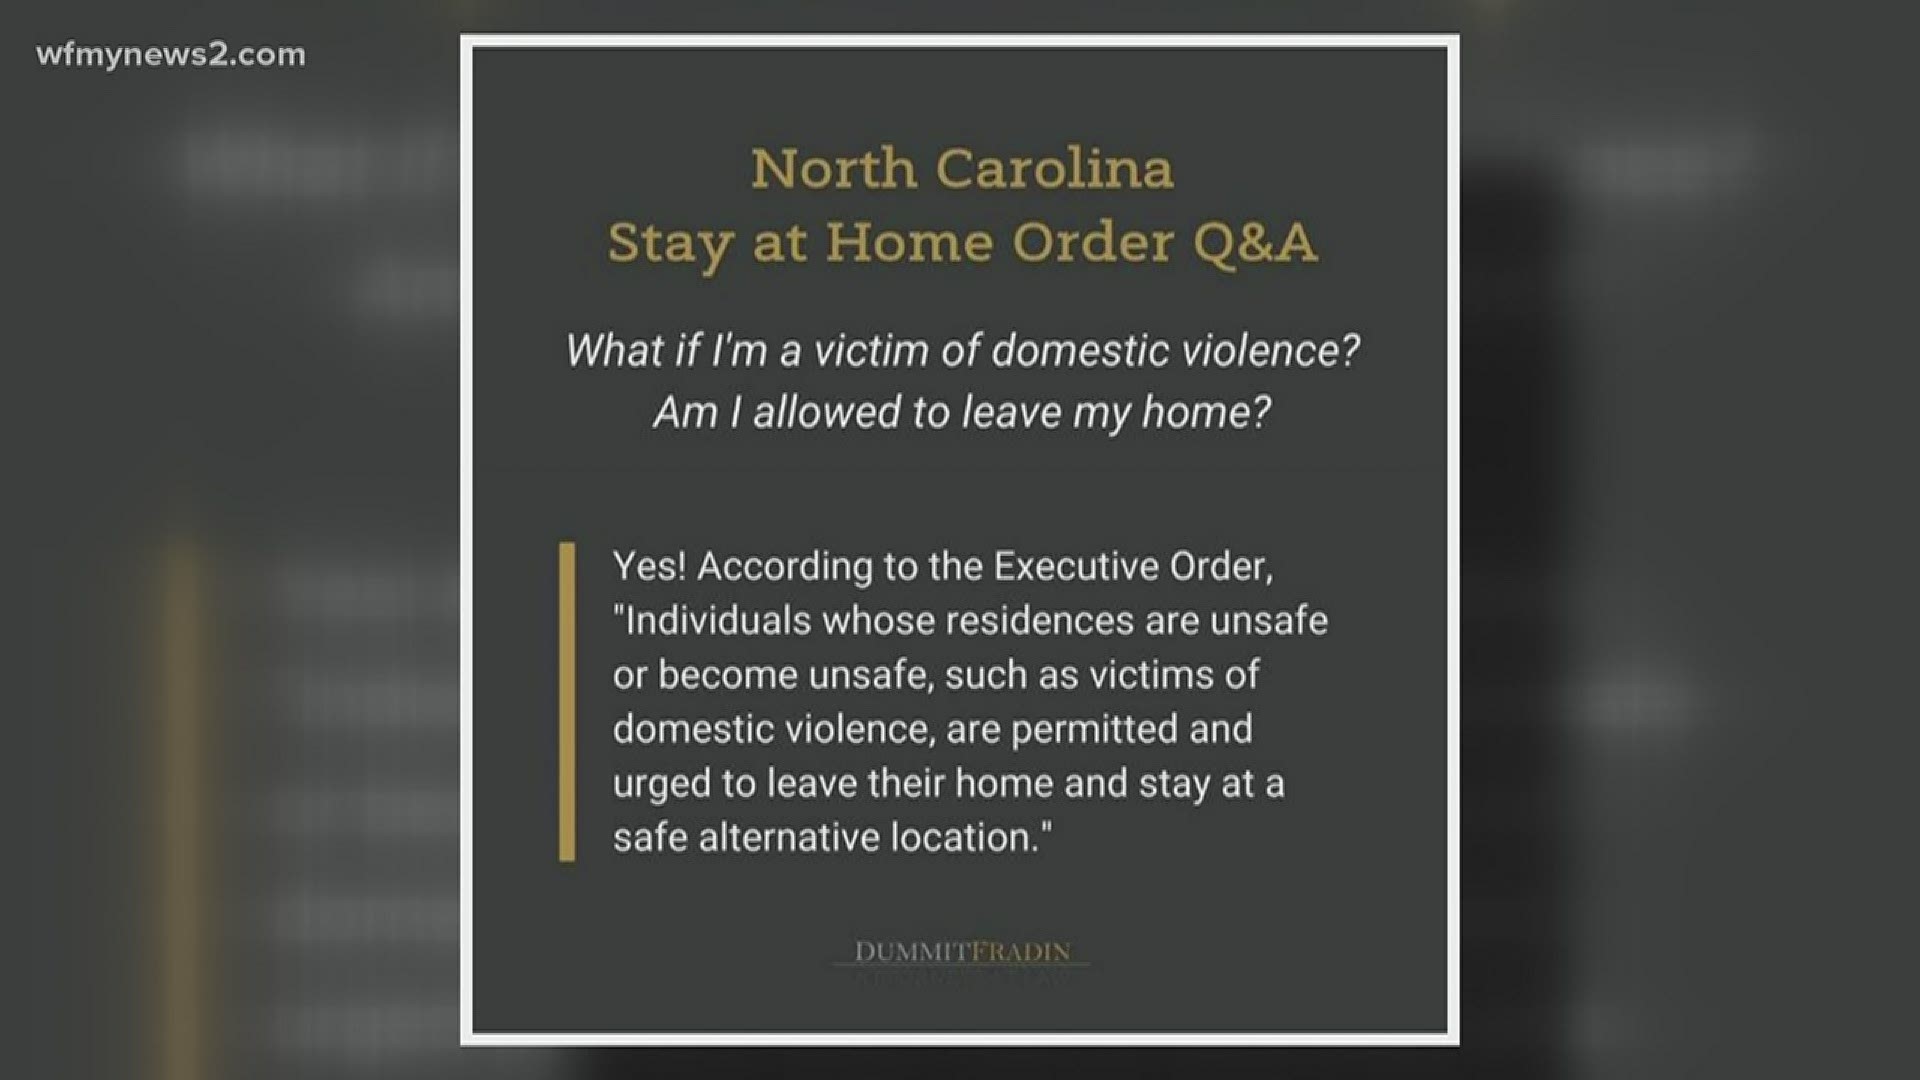 Staying at home should not mean staying in harm's way, that is the message family justice advocates want to send to domestic violence victims during this pandemic.